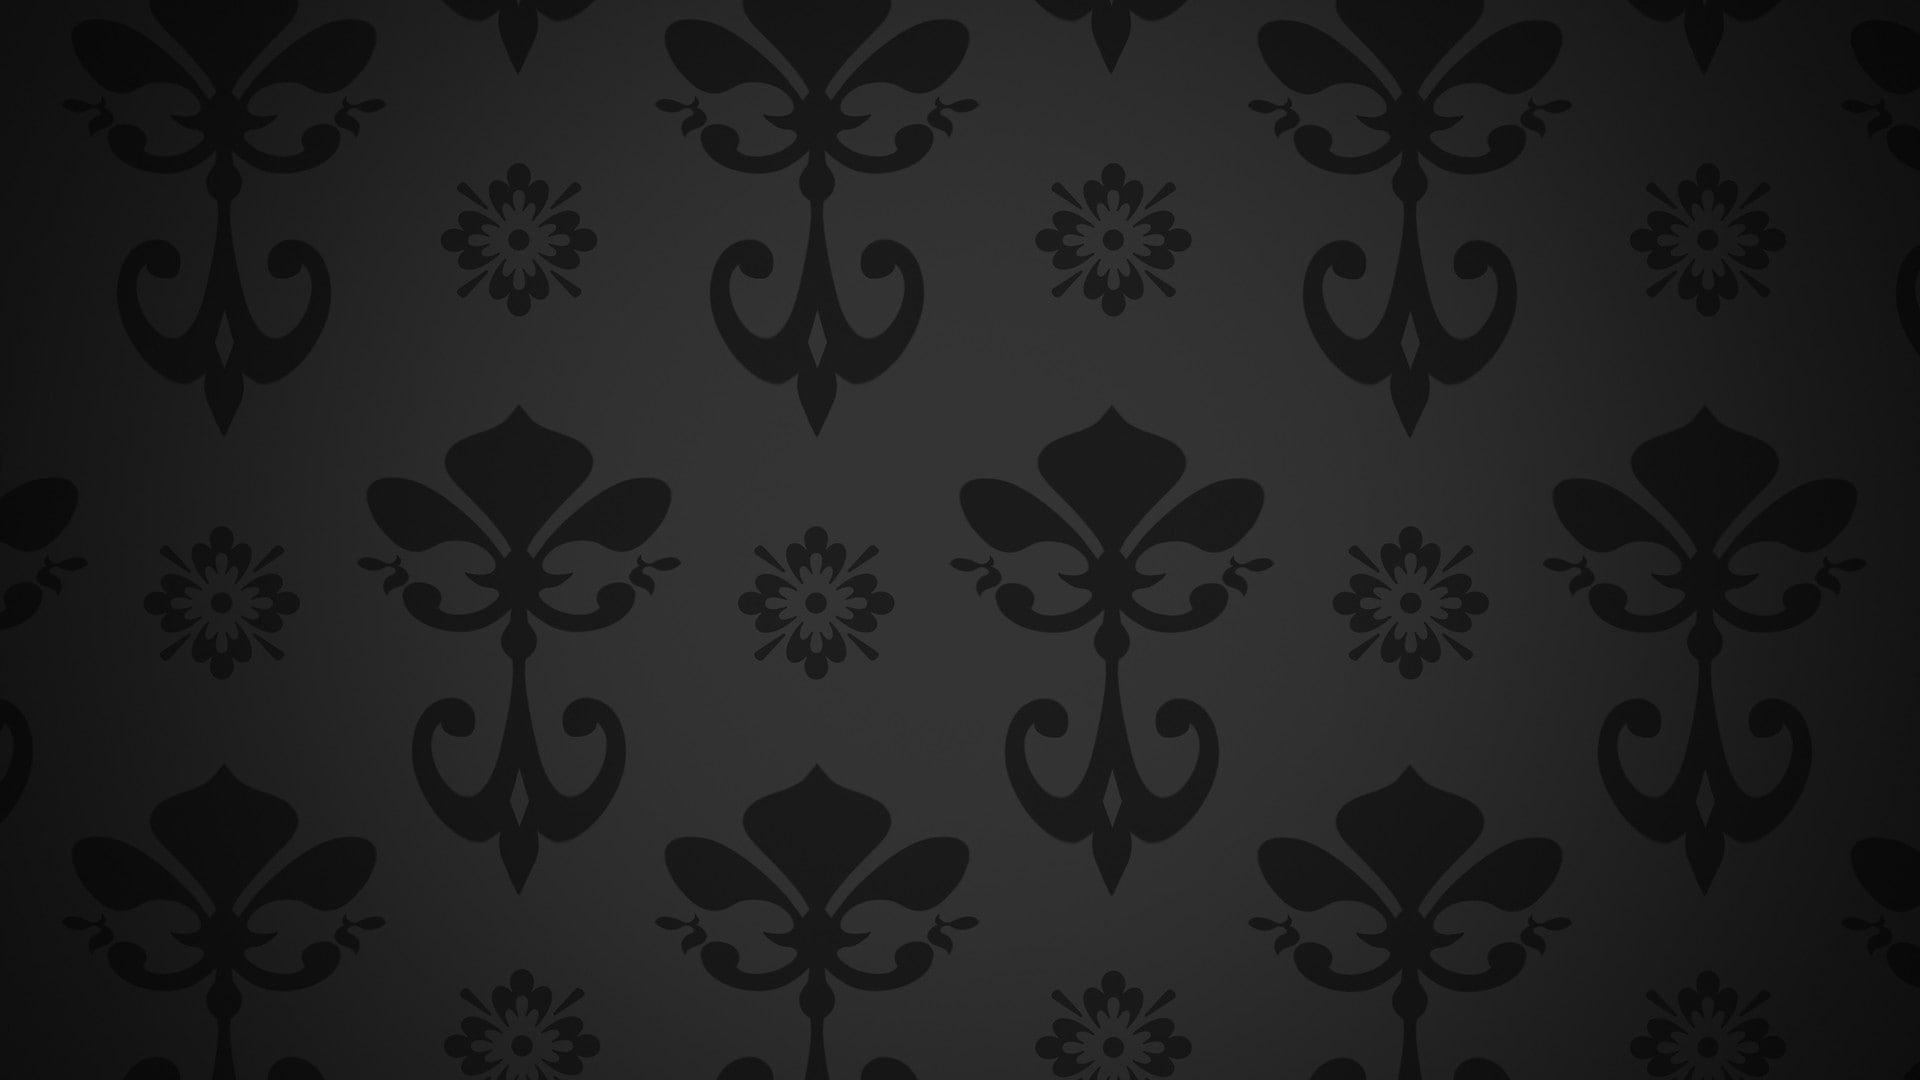 abstract, floral, pattern, dark background, full frame, floral pattern